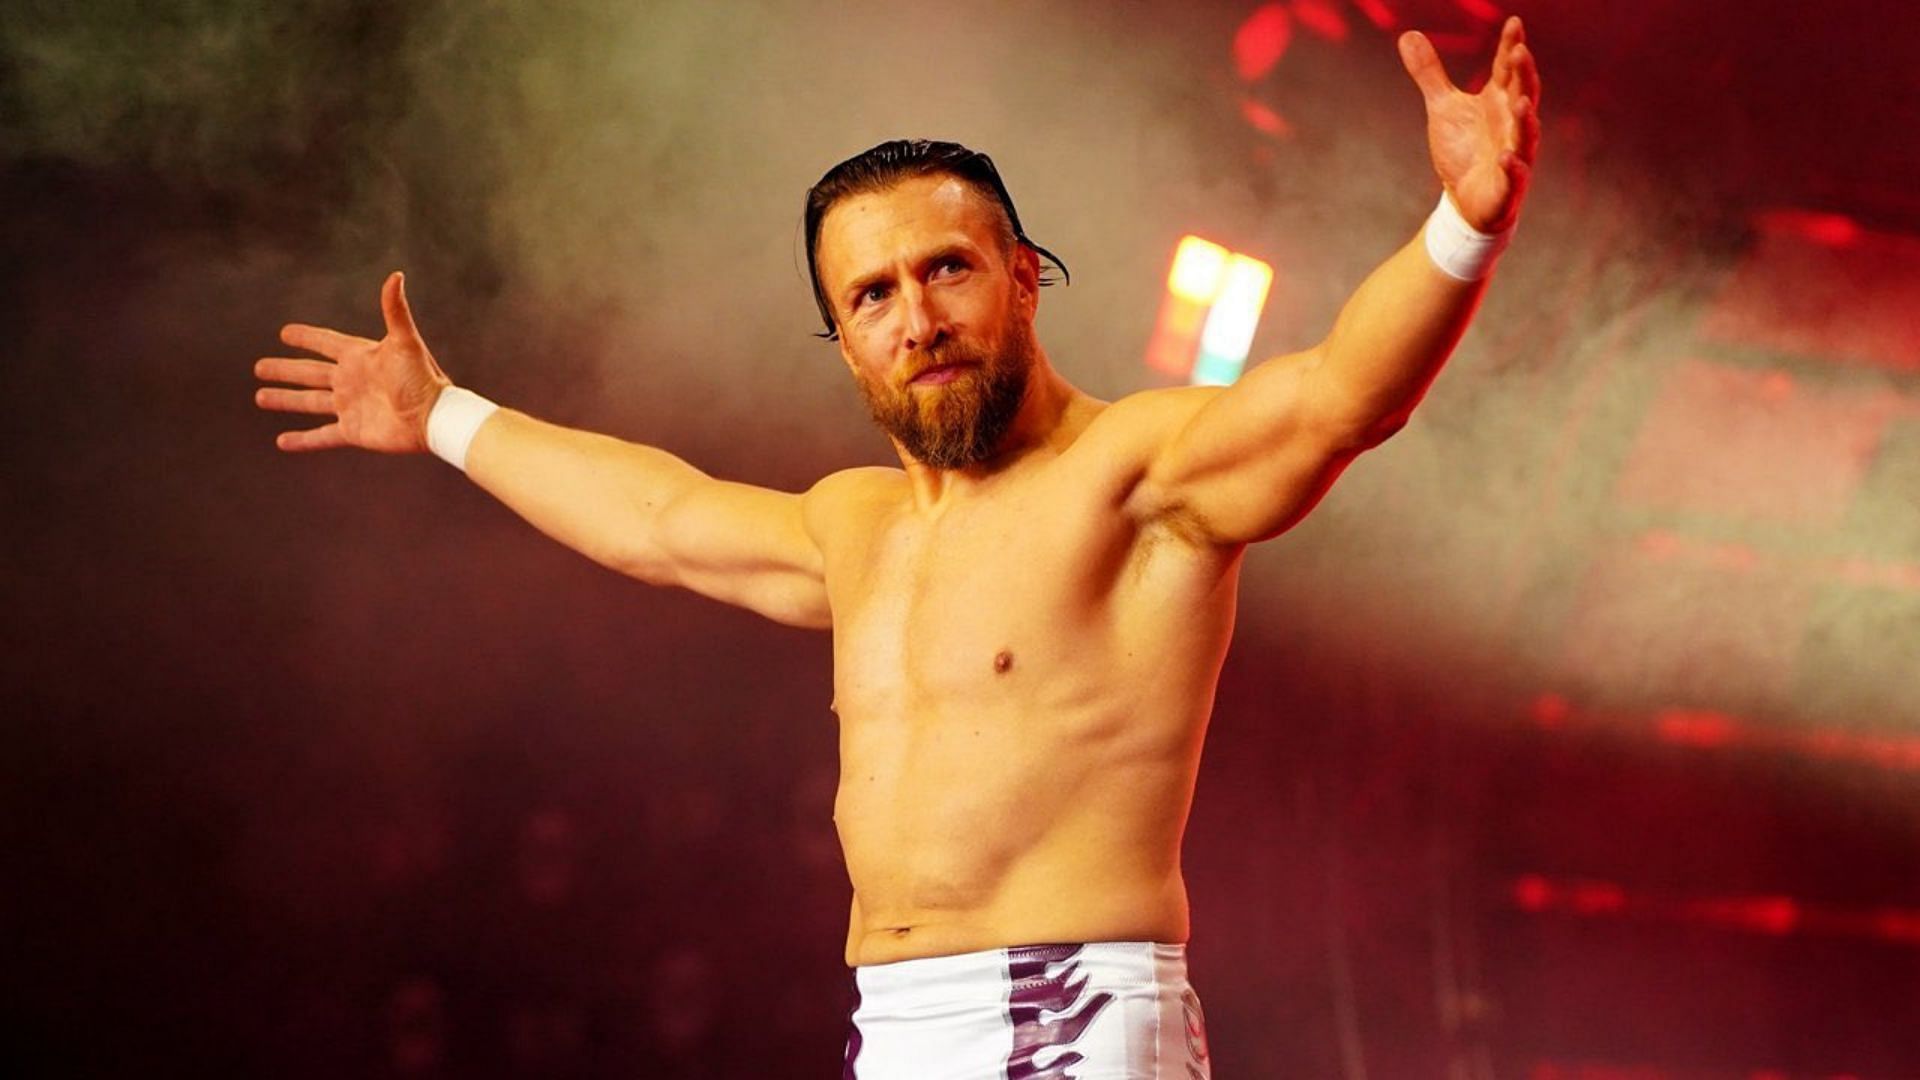 Bryan Danielson making his entrance at an AEW event